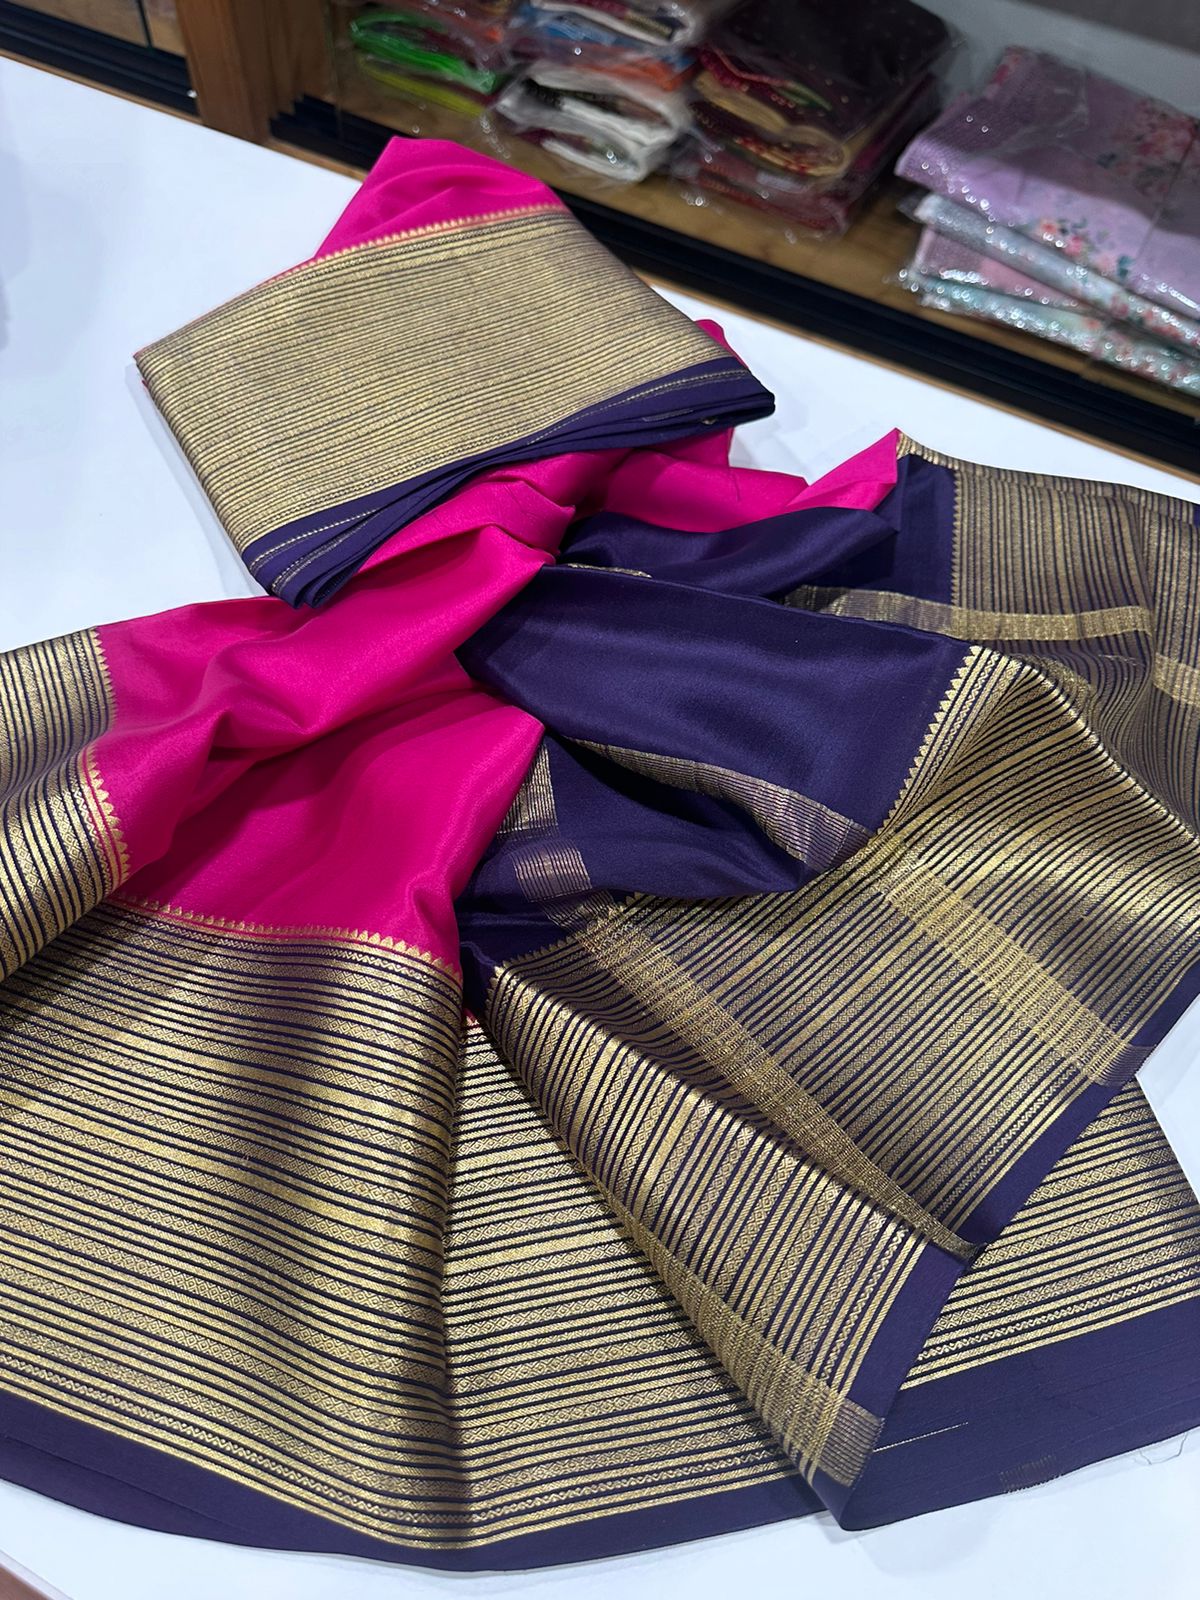 Pure Mysore silk sarees Traditional kanchi borders with elegant color combinations